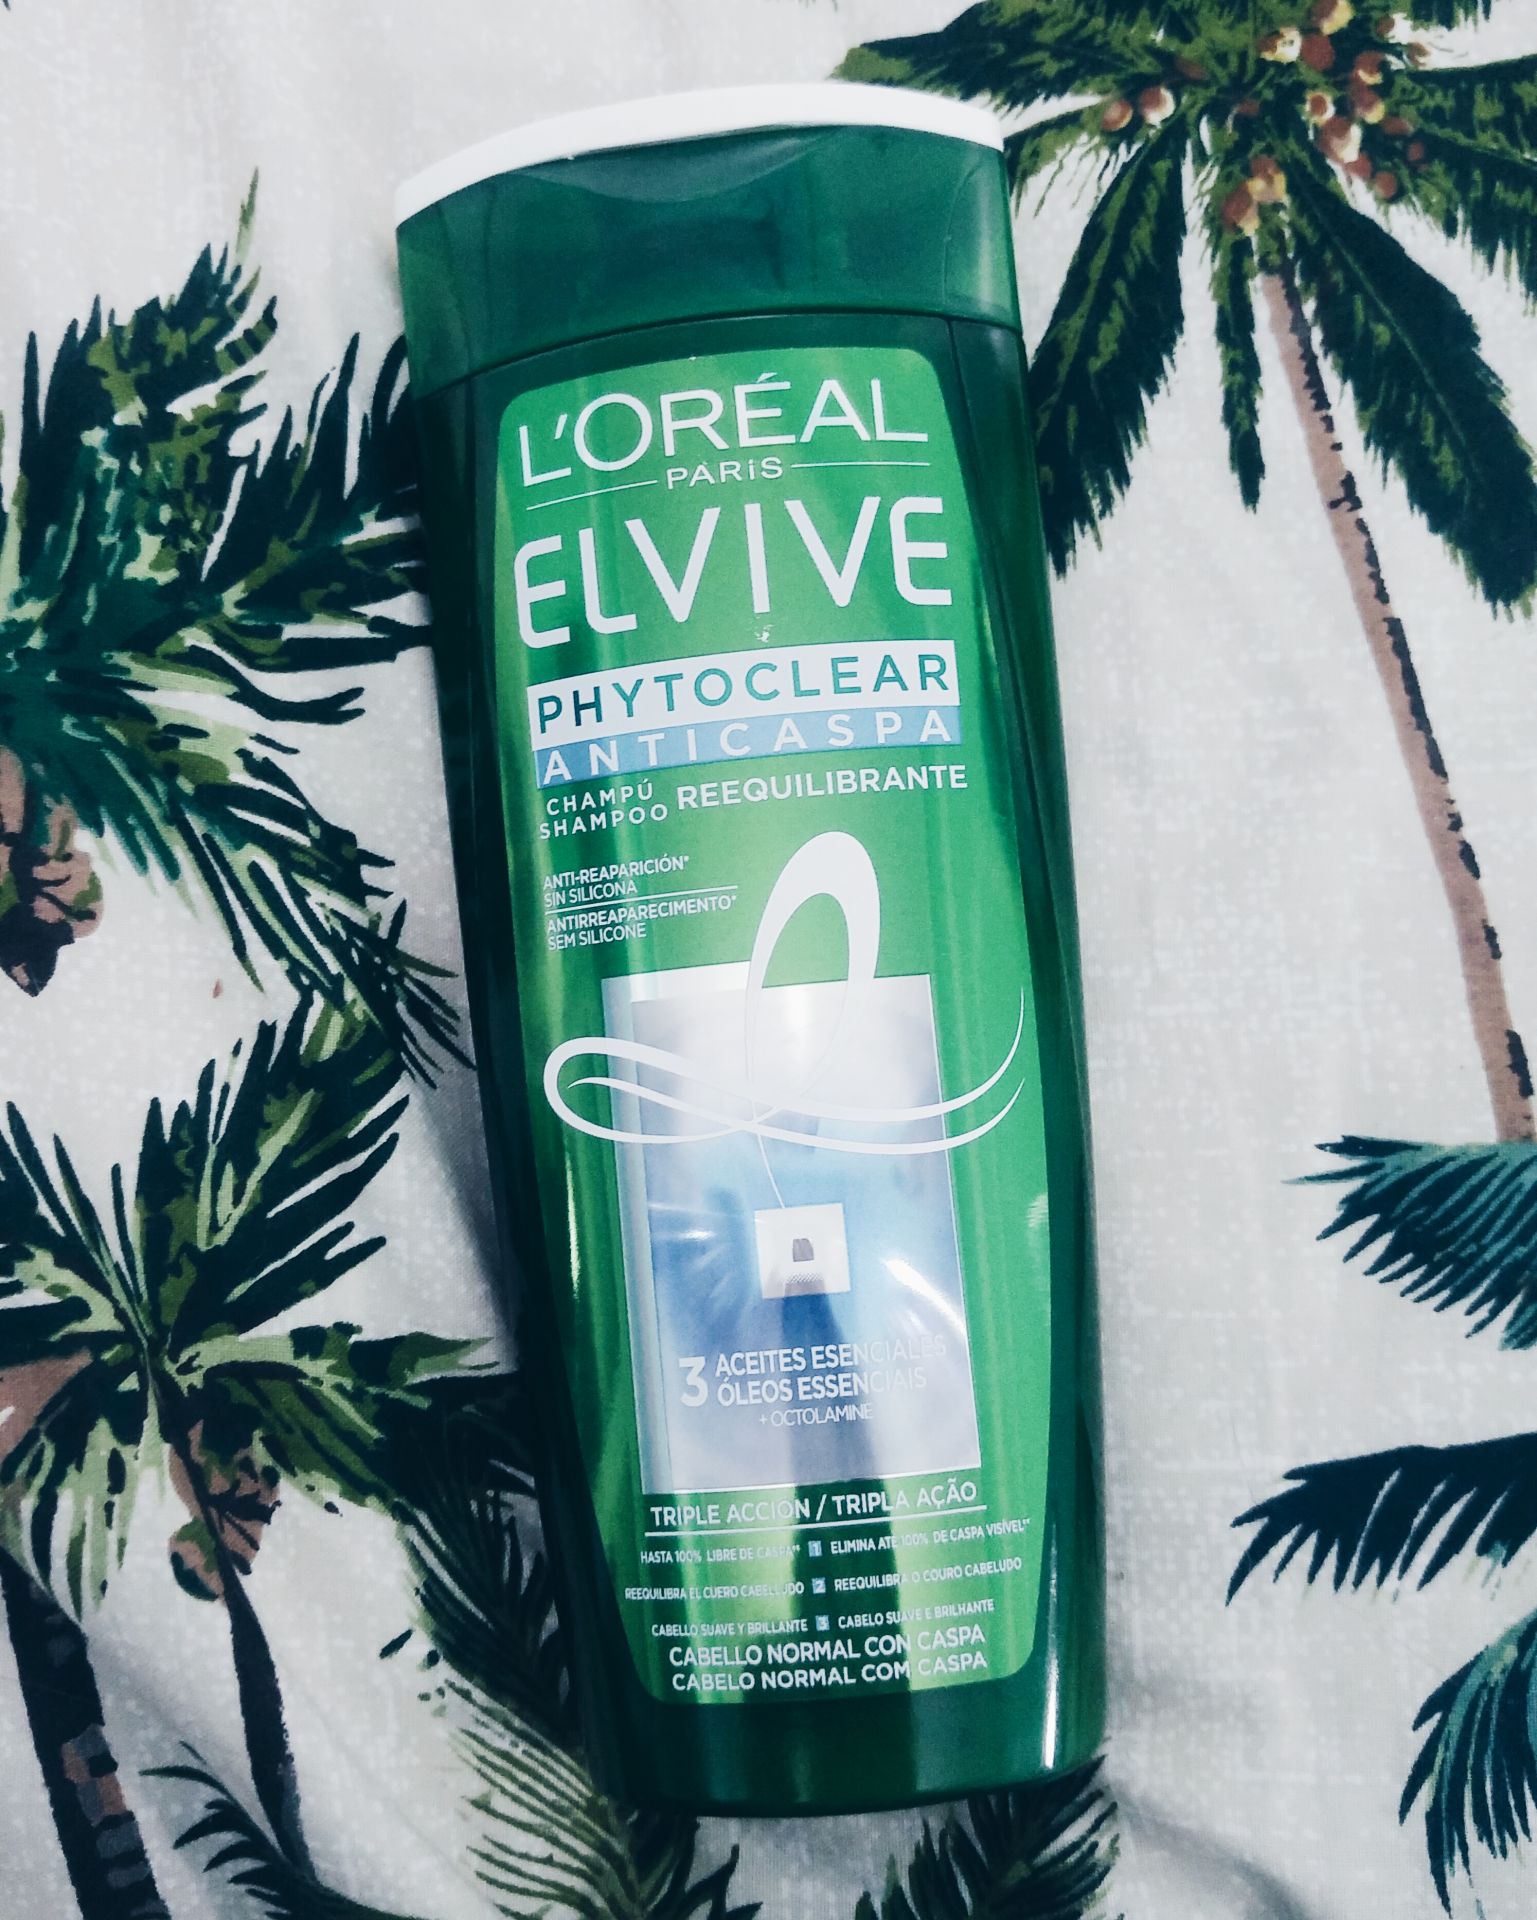 Elvive Phytoclear